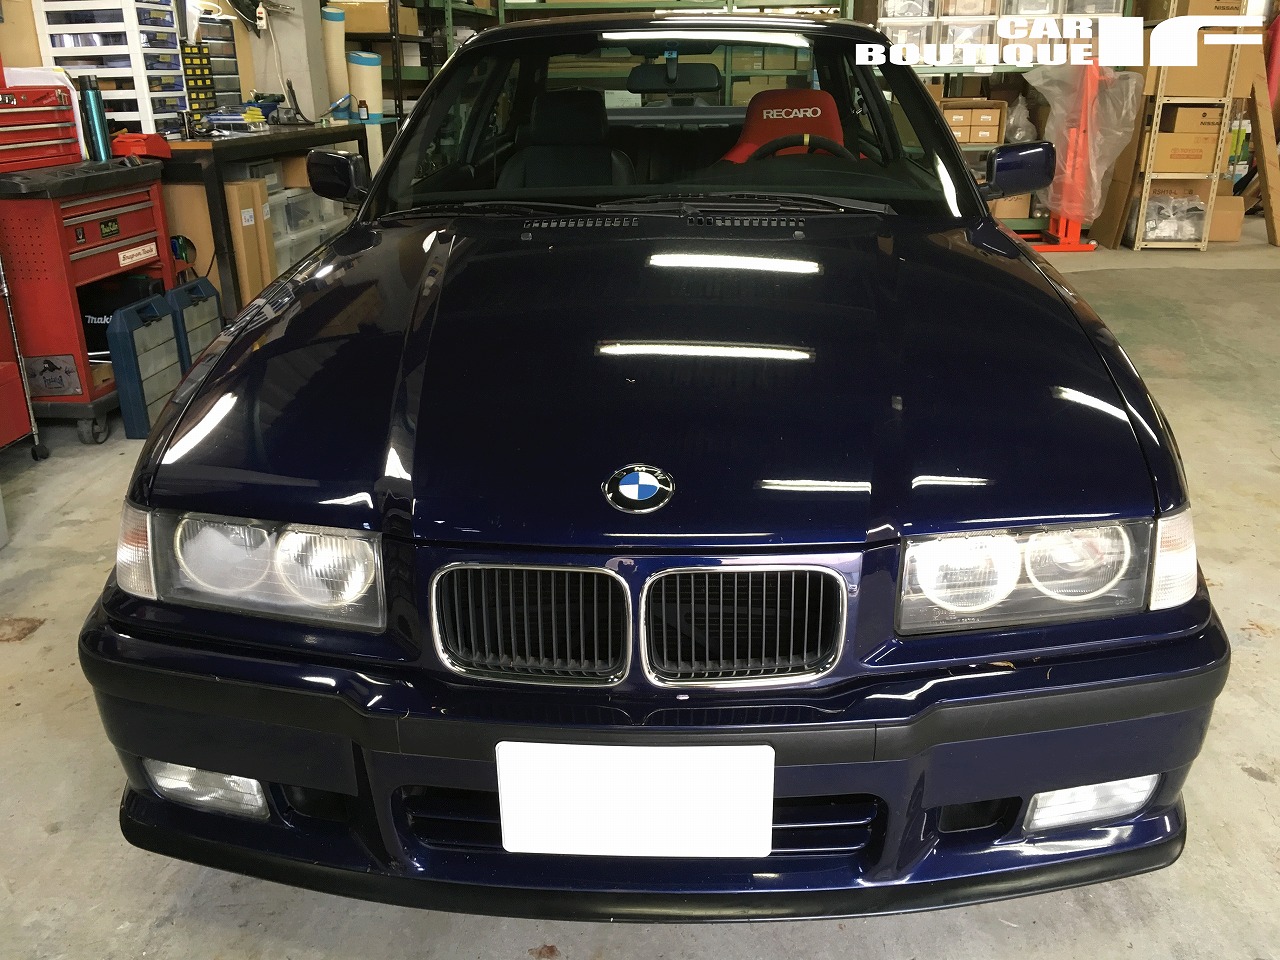 BMW E36に1DINデッキ＆レーダー！ | CarboutiqueIF | カーブティック